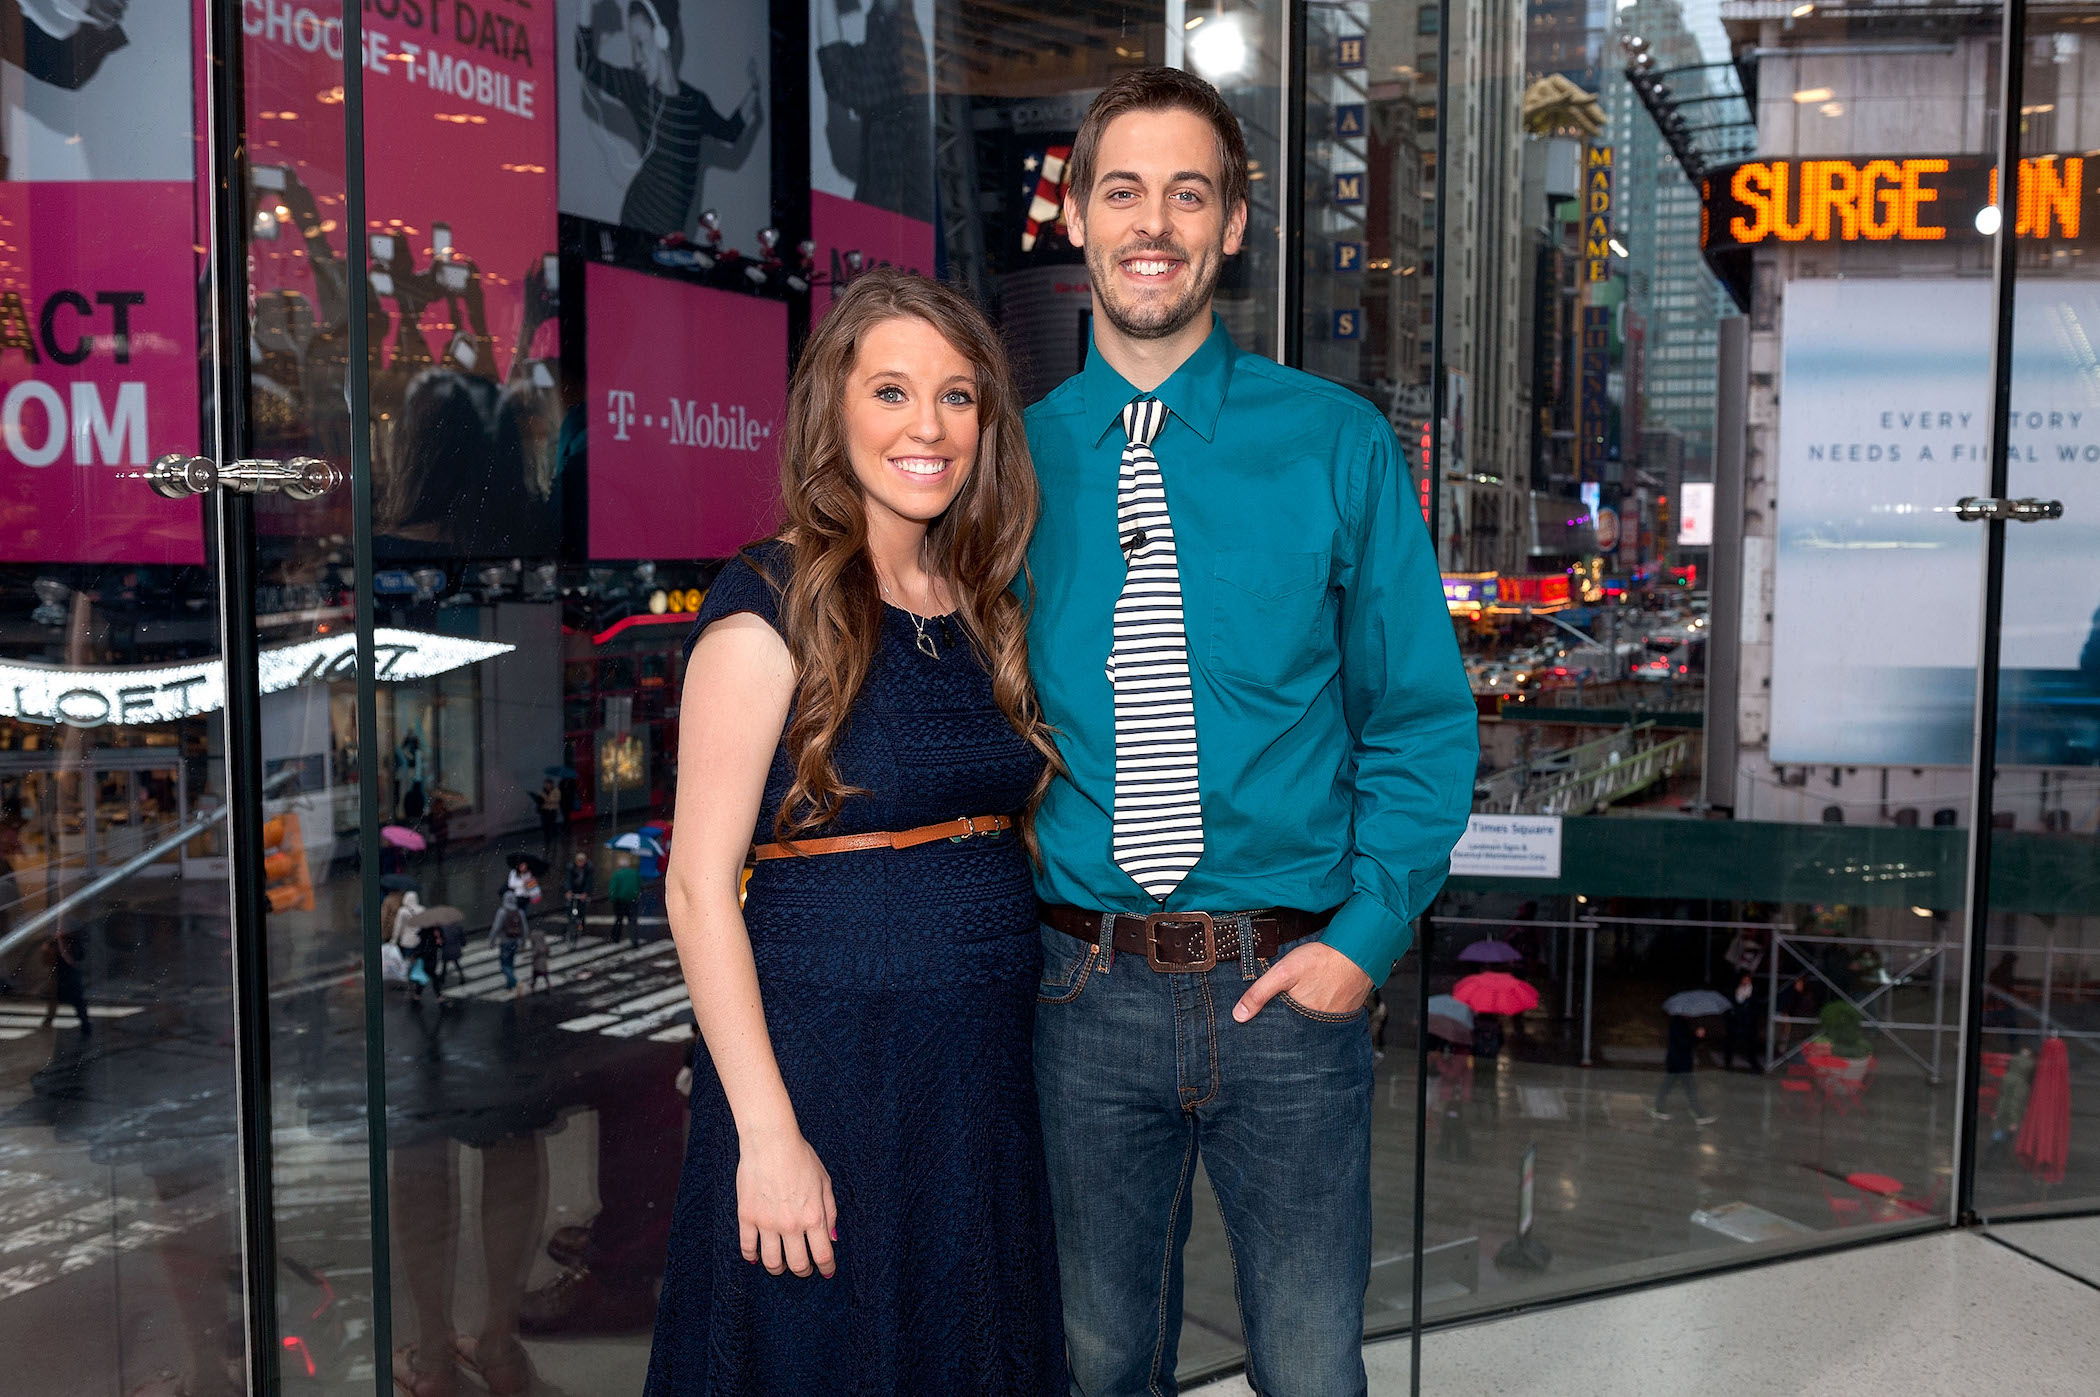 Jill Duggar made Duggar news with her pregnancy. She's standing next to Derick Dillard and smiling on the set of 'Extra'